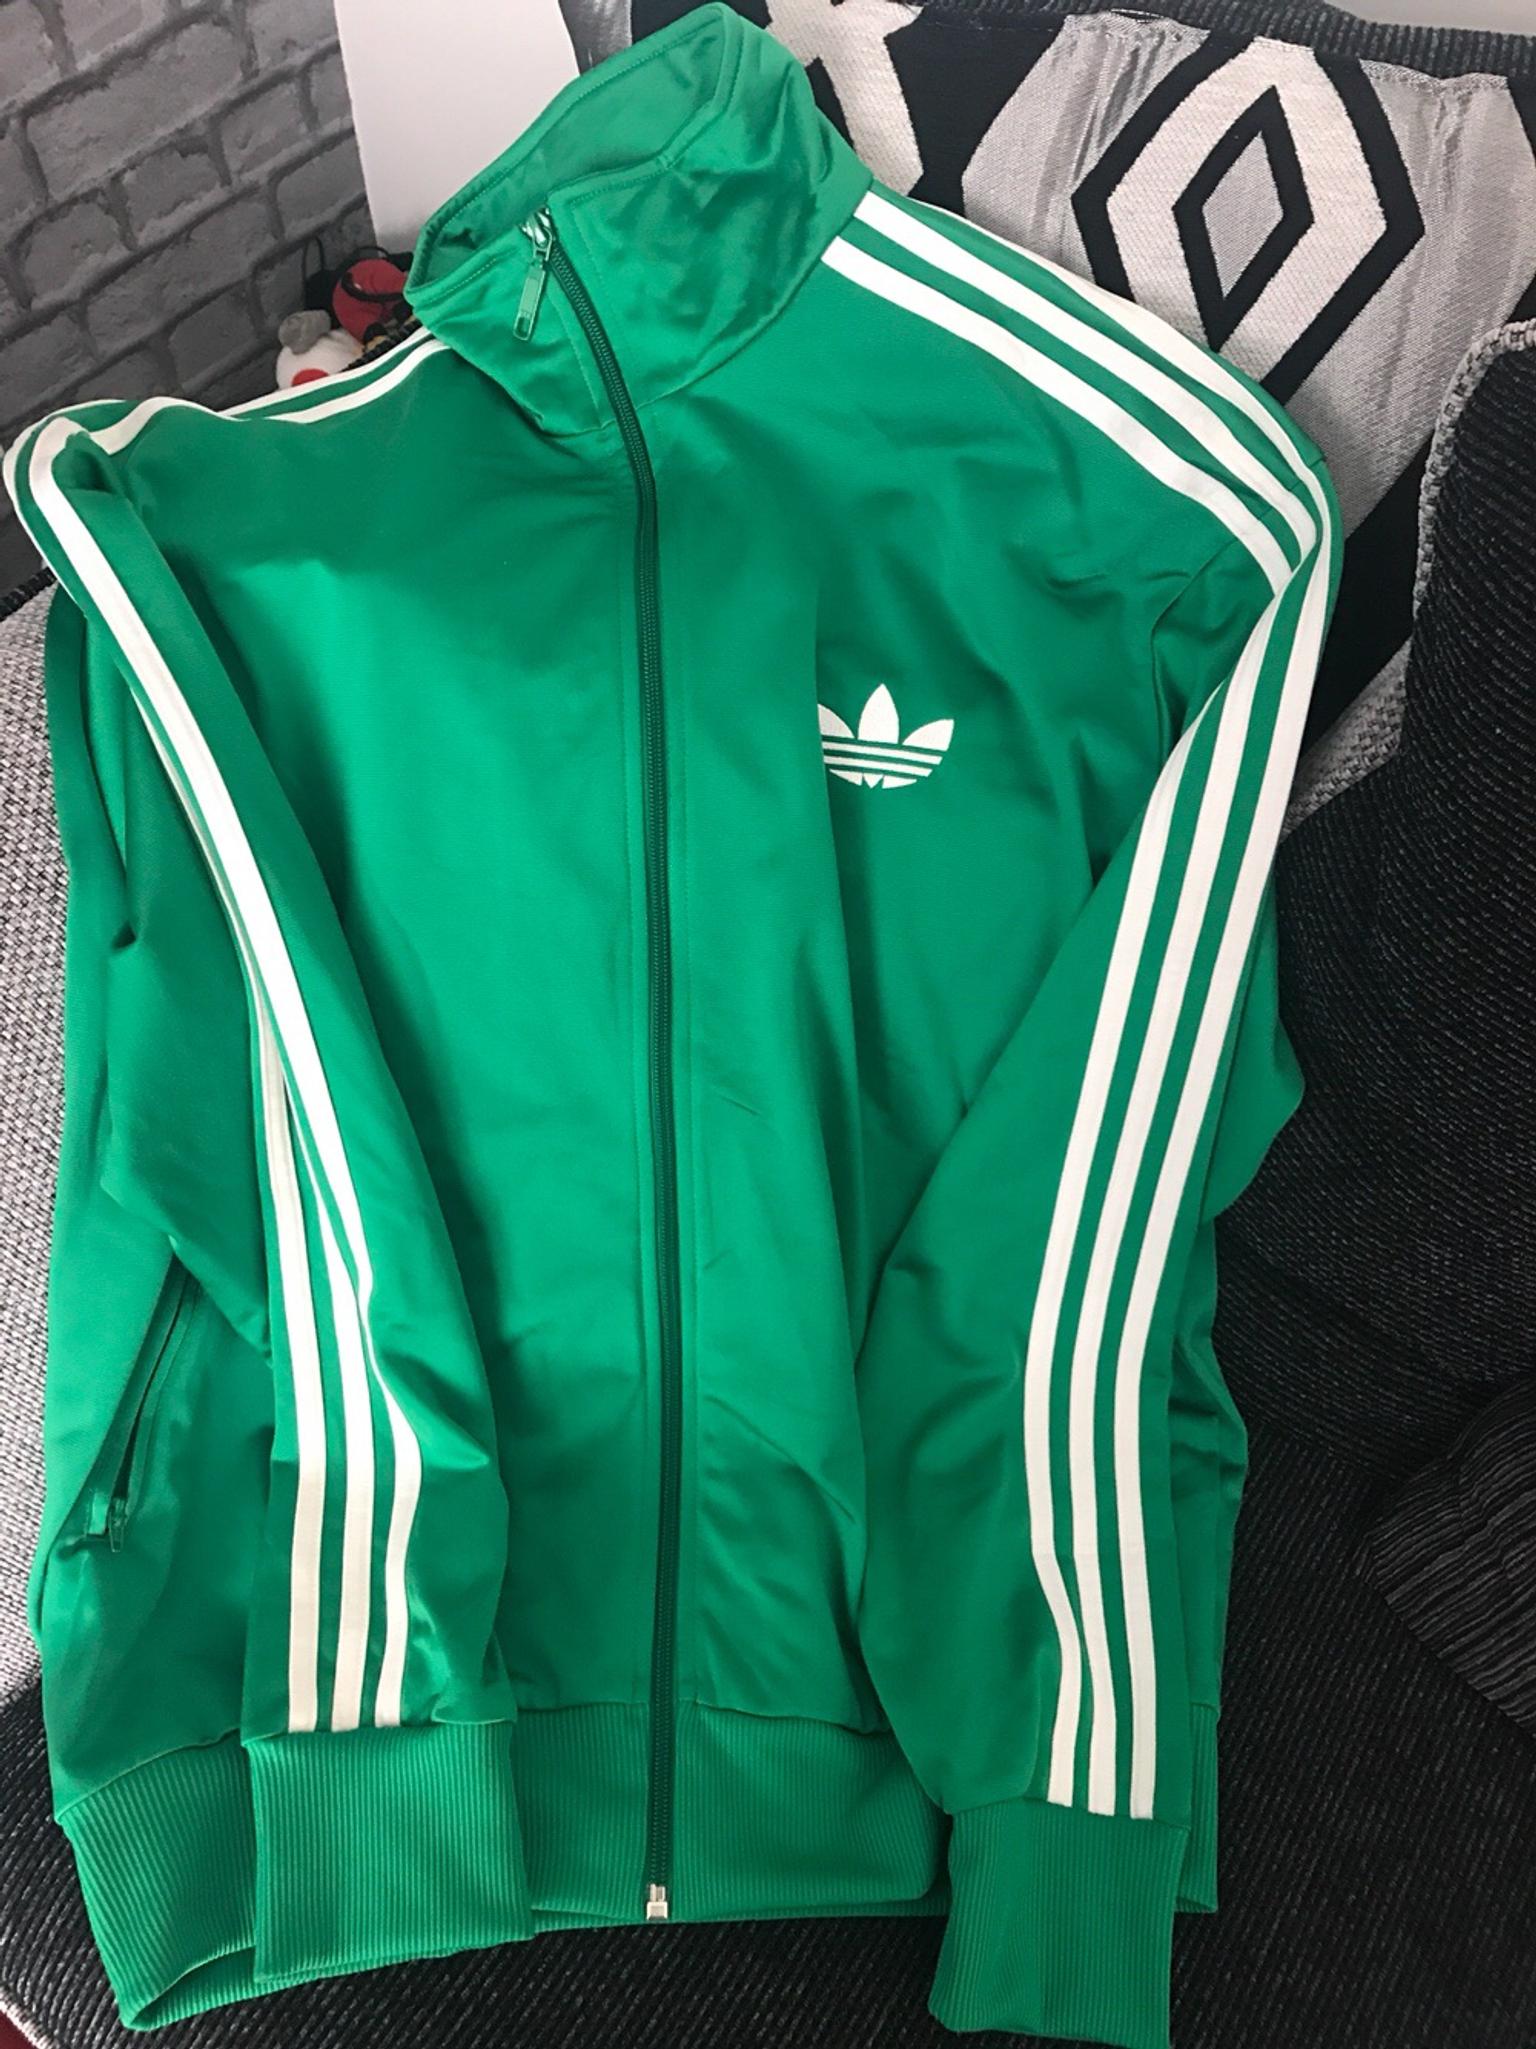 adidas jacket green and white